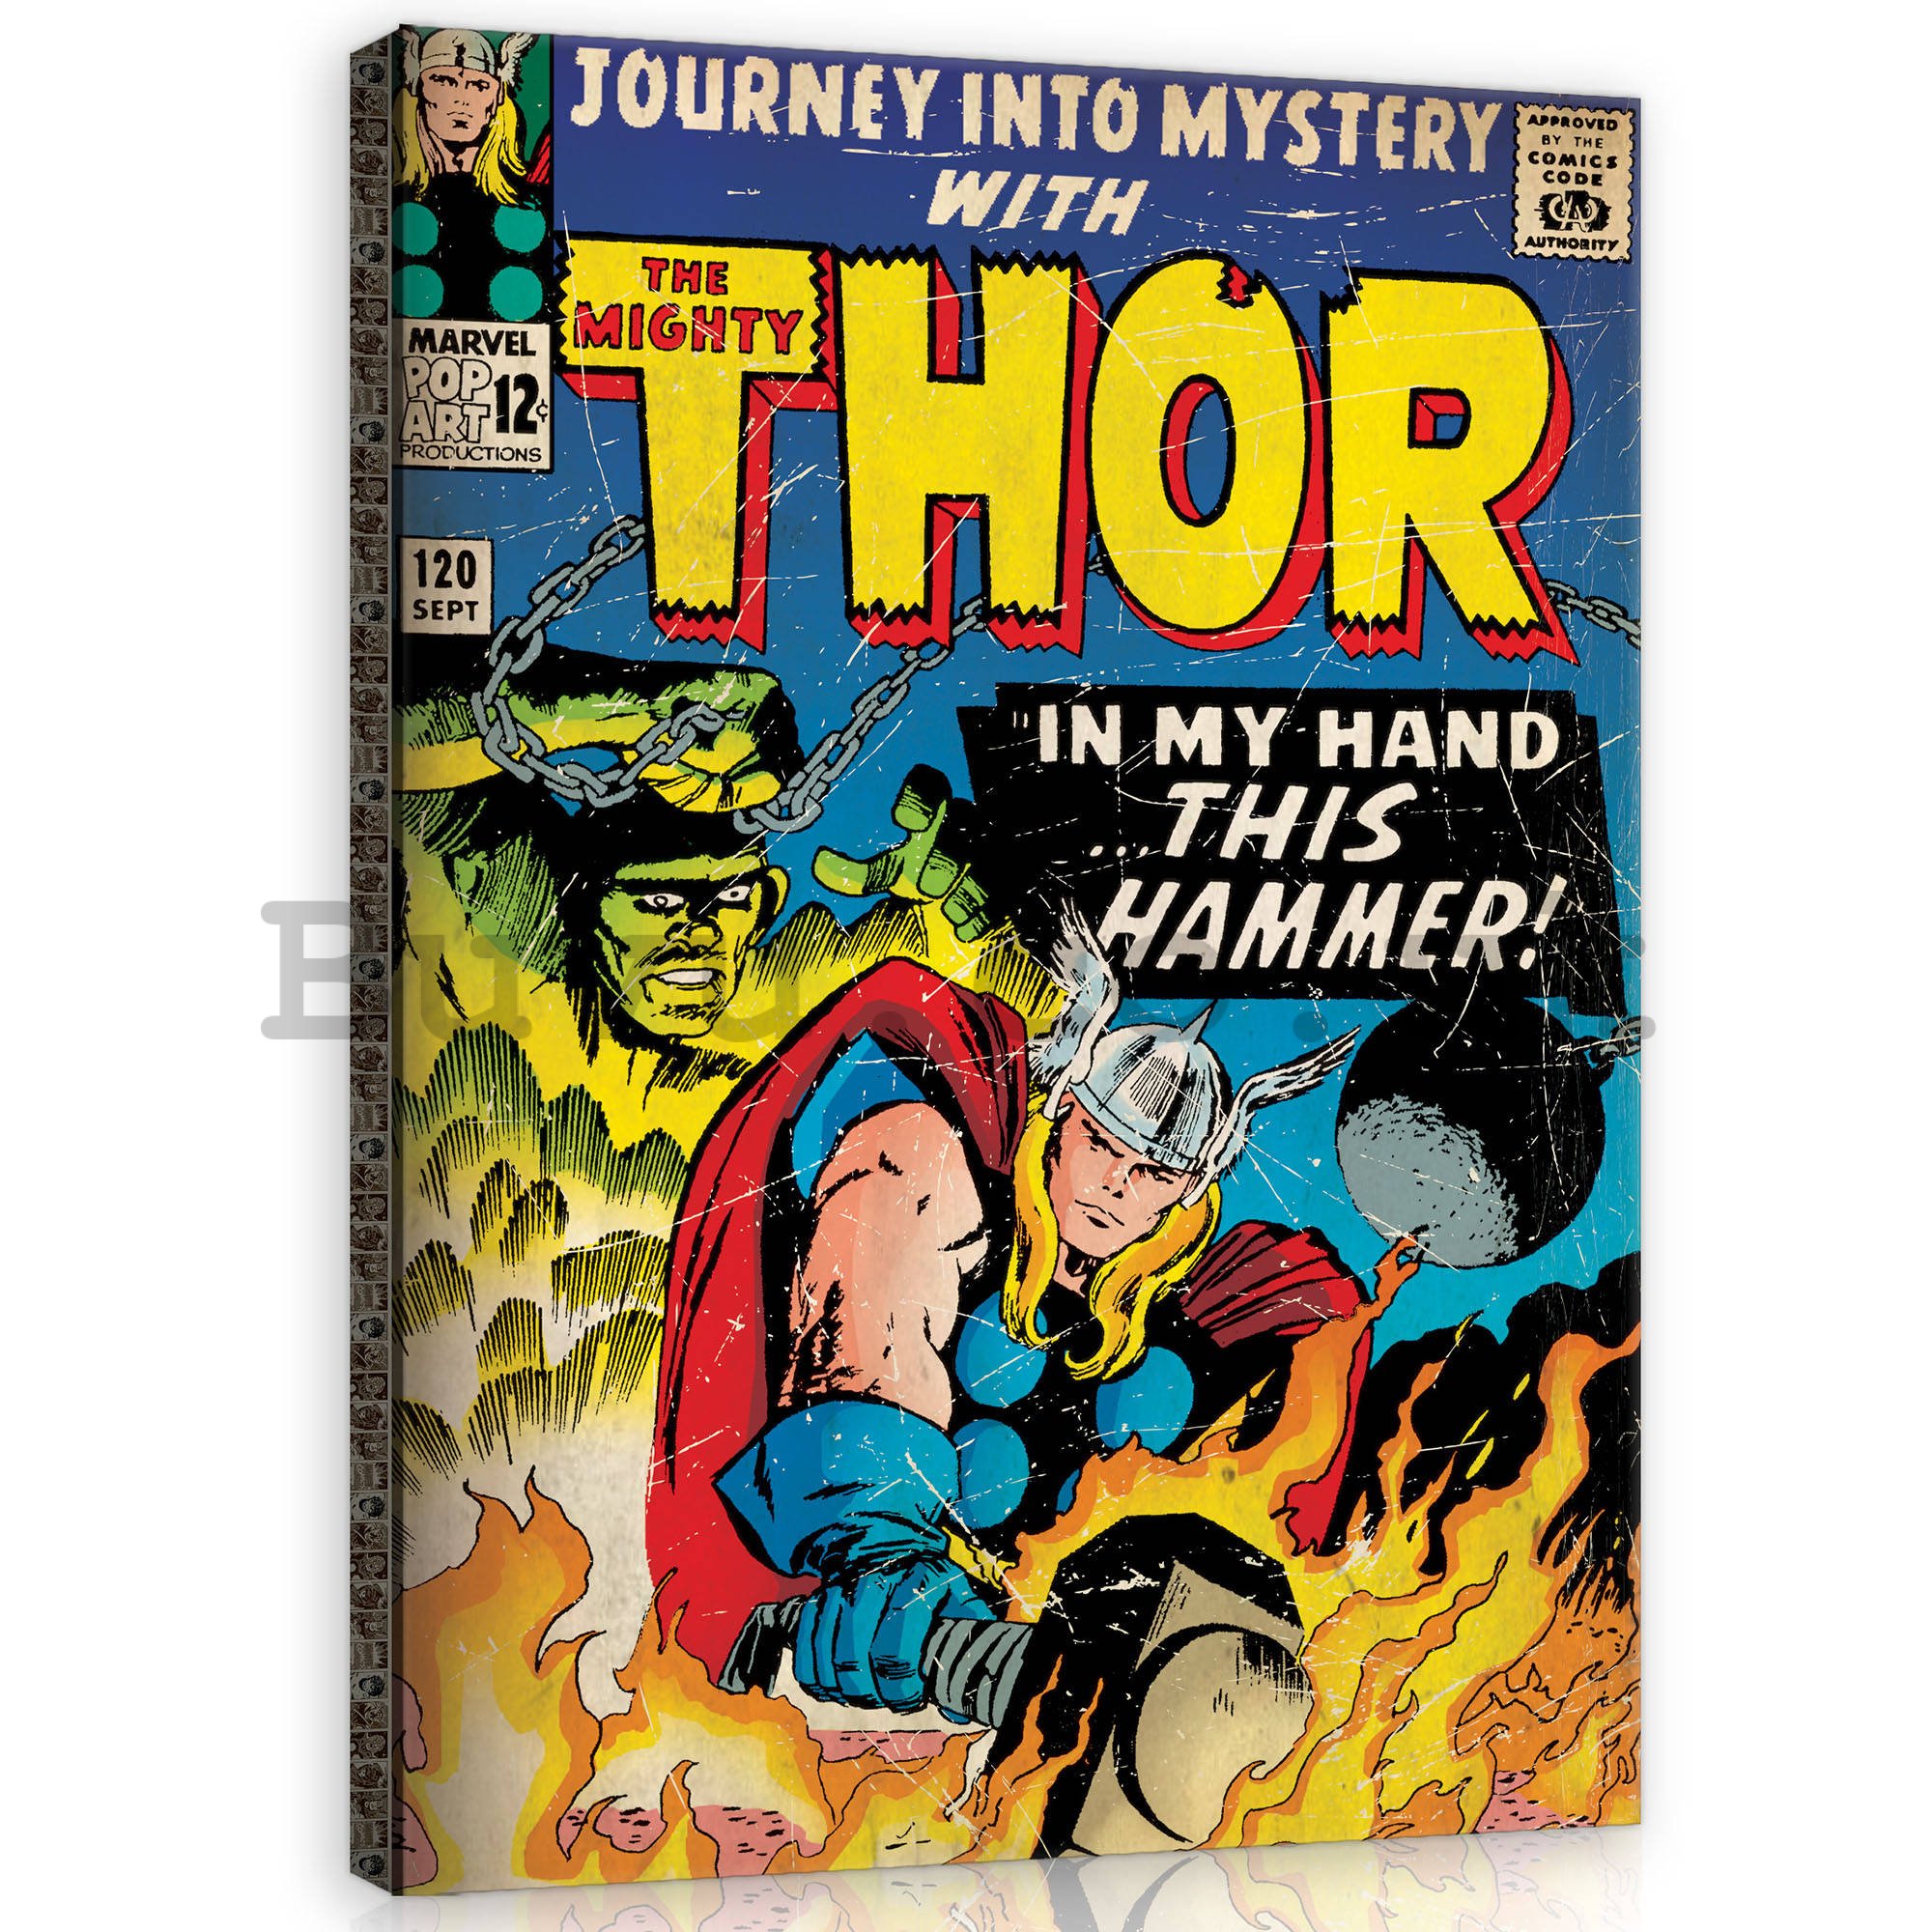 Painting on canvas: The Mighty Thor (In My Hand This Hammer!) - 75x100 cm